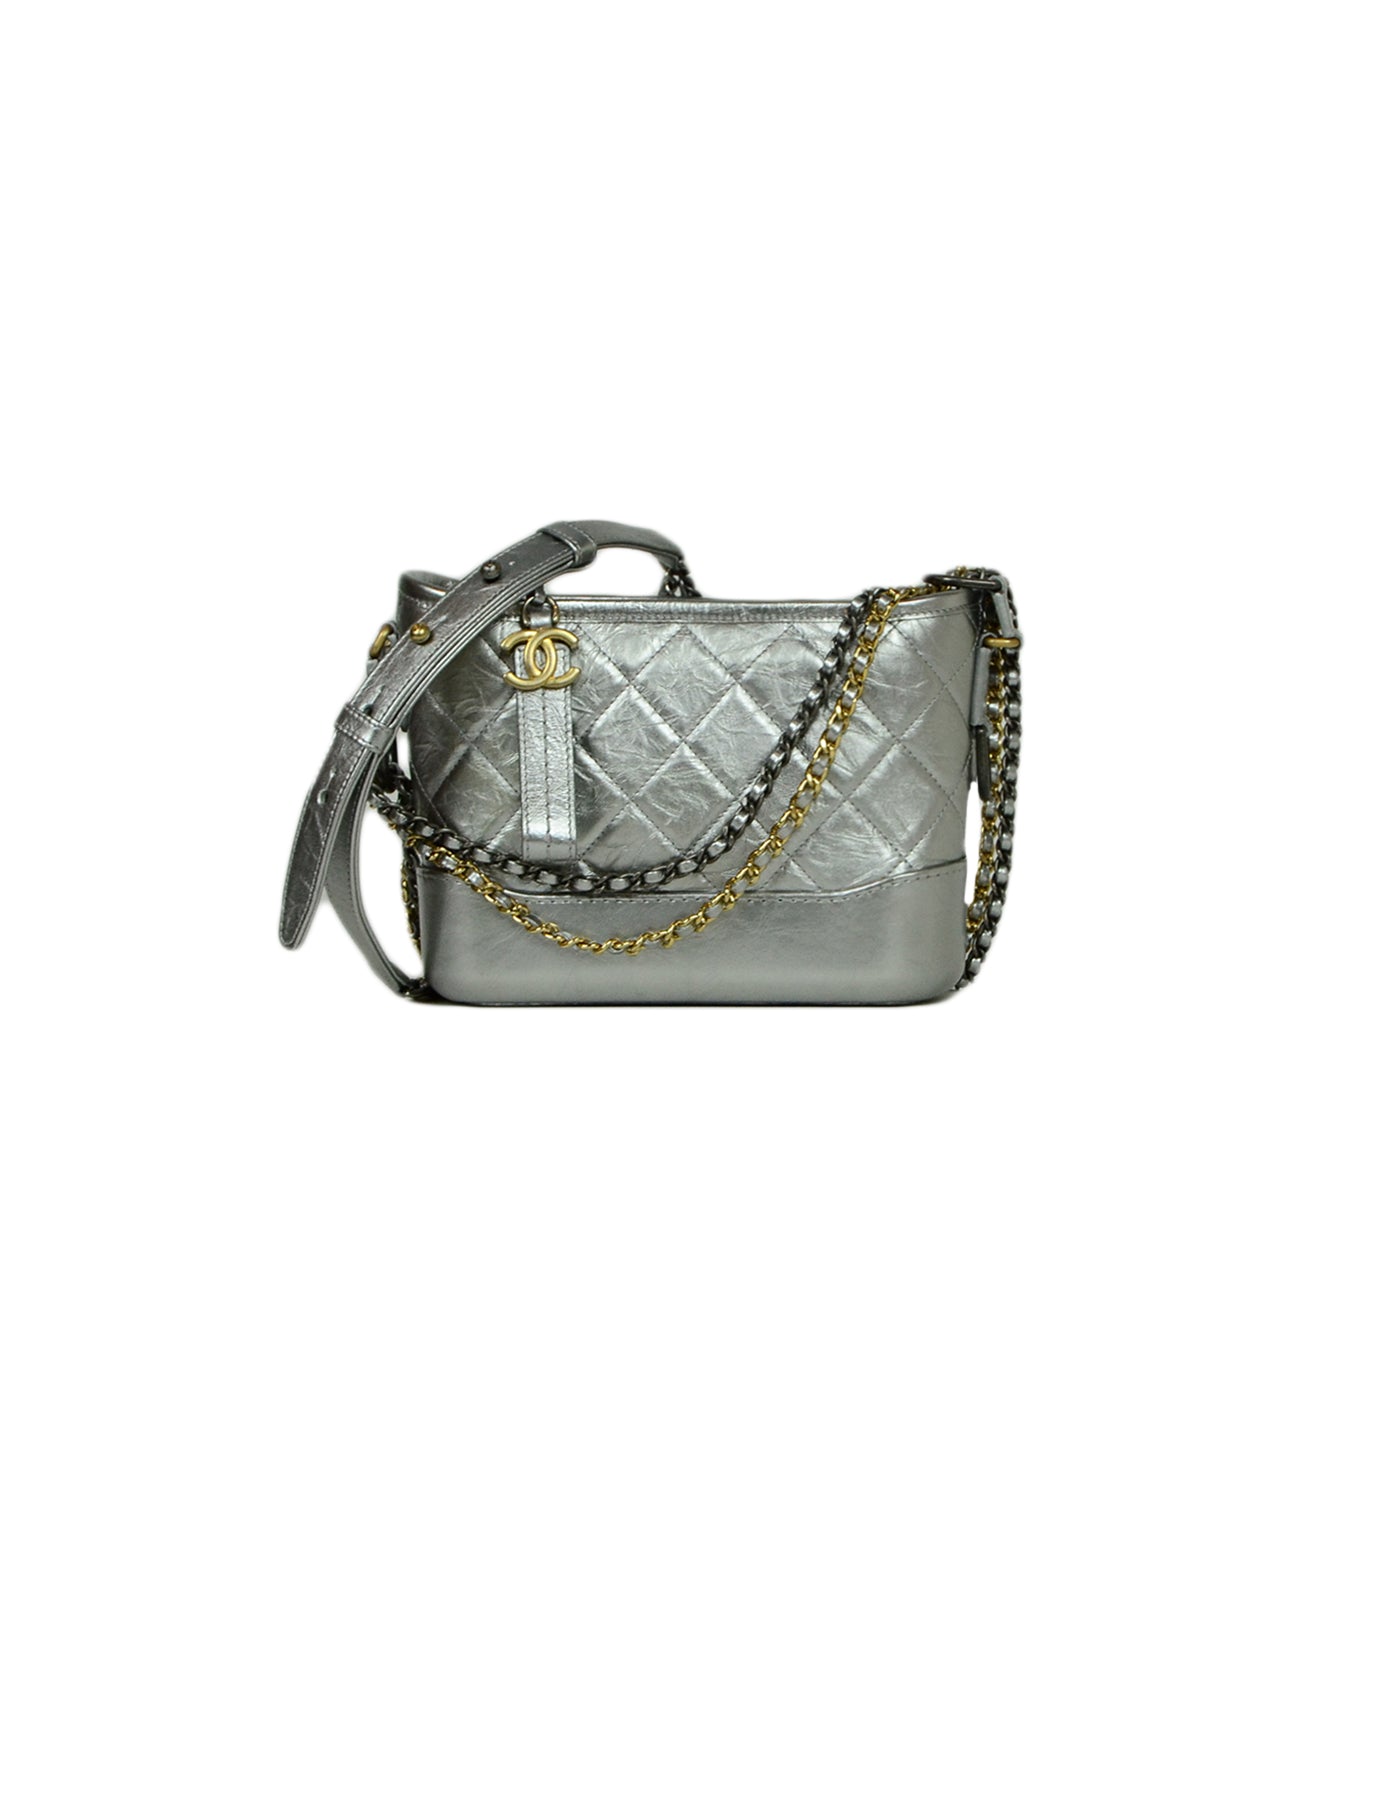 Chanel Silver Metallic Aged Calfskin Quilted Small Gabrielle Hobo Bag